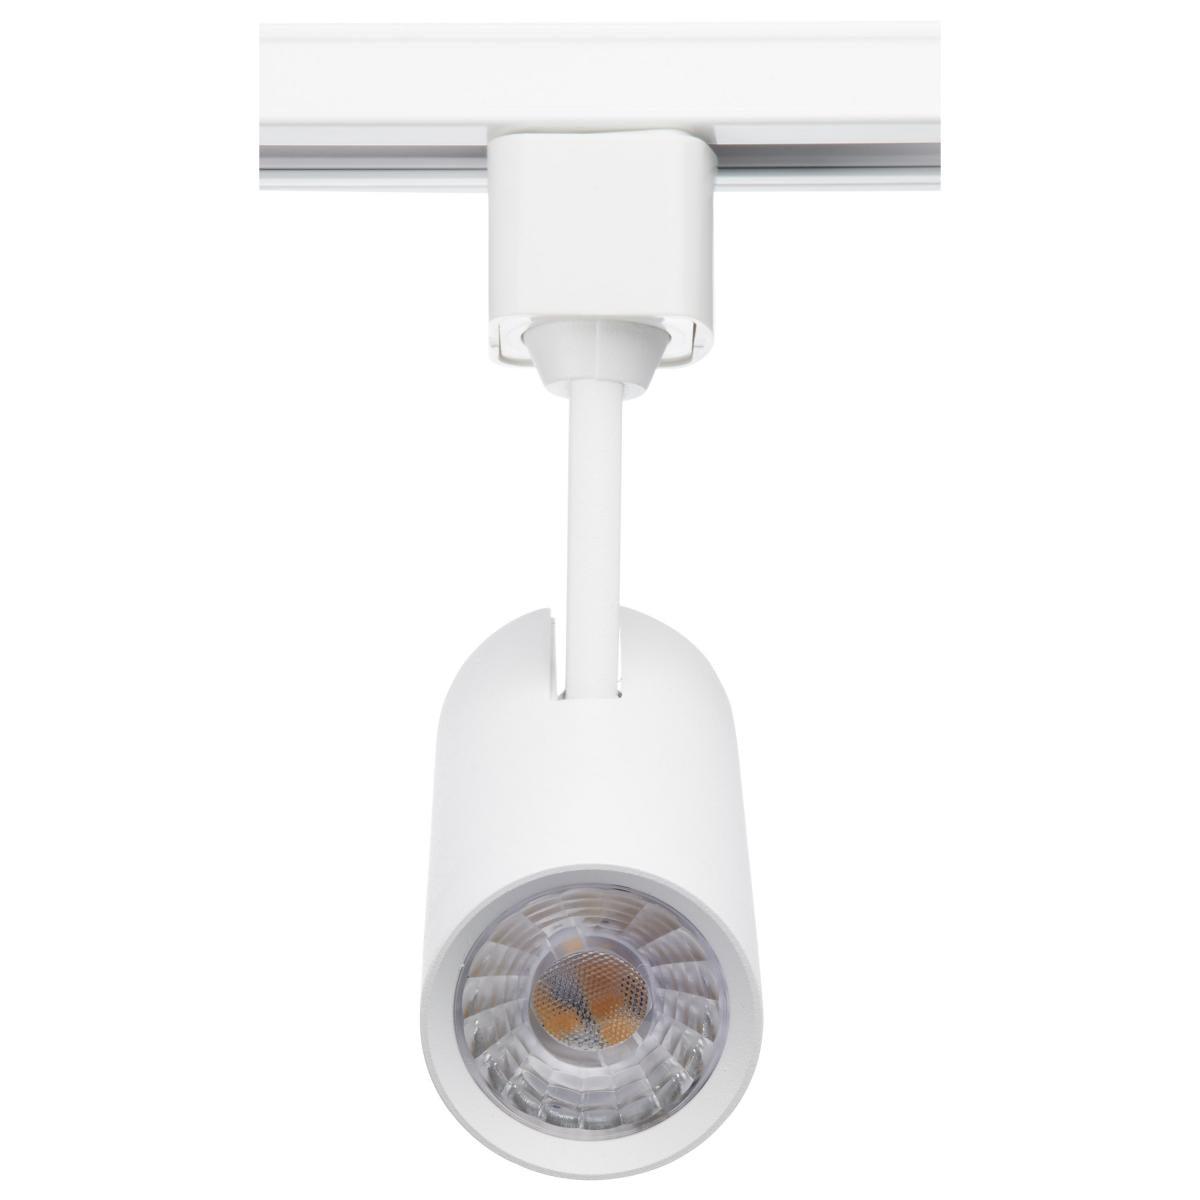 Pro LED Commercial Track Head, 10W, 3000K, 600 Lumens, Halo (H) - Bees Lighting